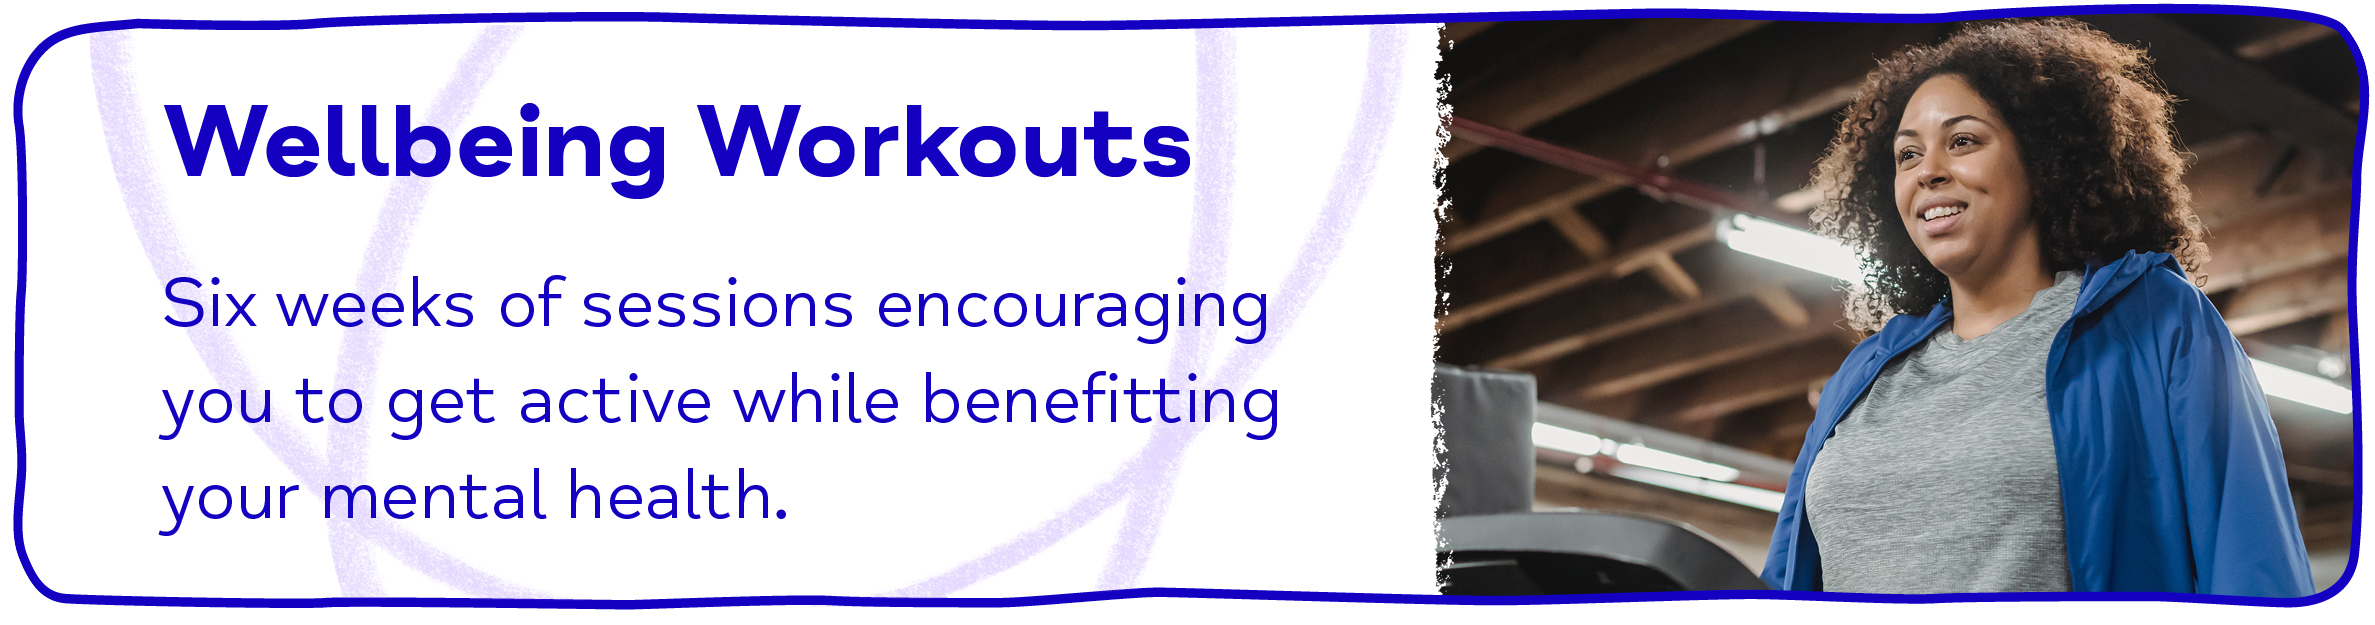 Wellbeing Workouts Six weeks of sessions encouraging you to get active while benefitting your mental health.